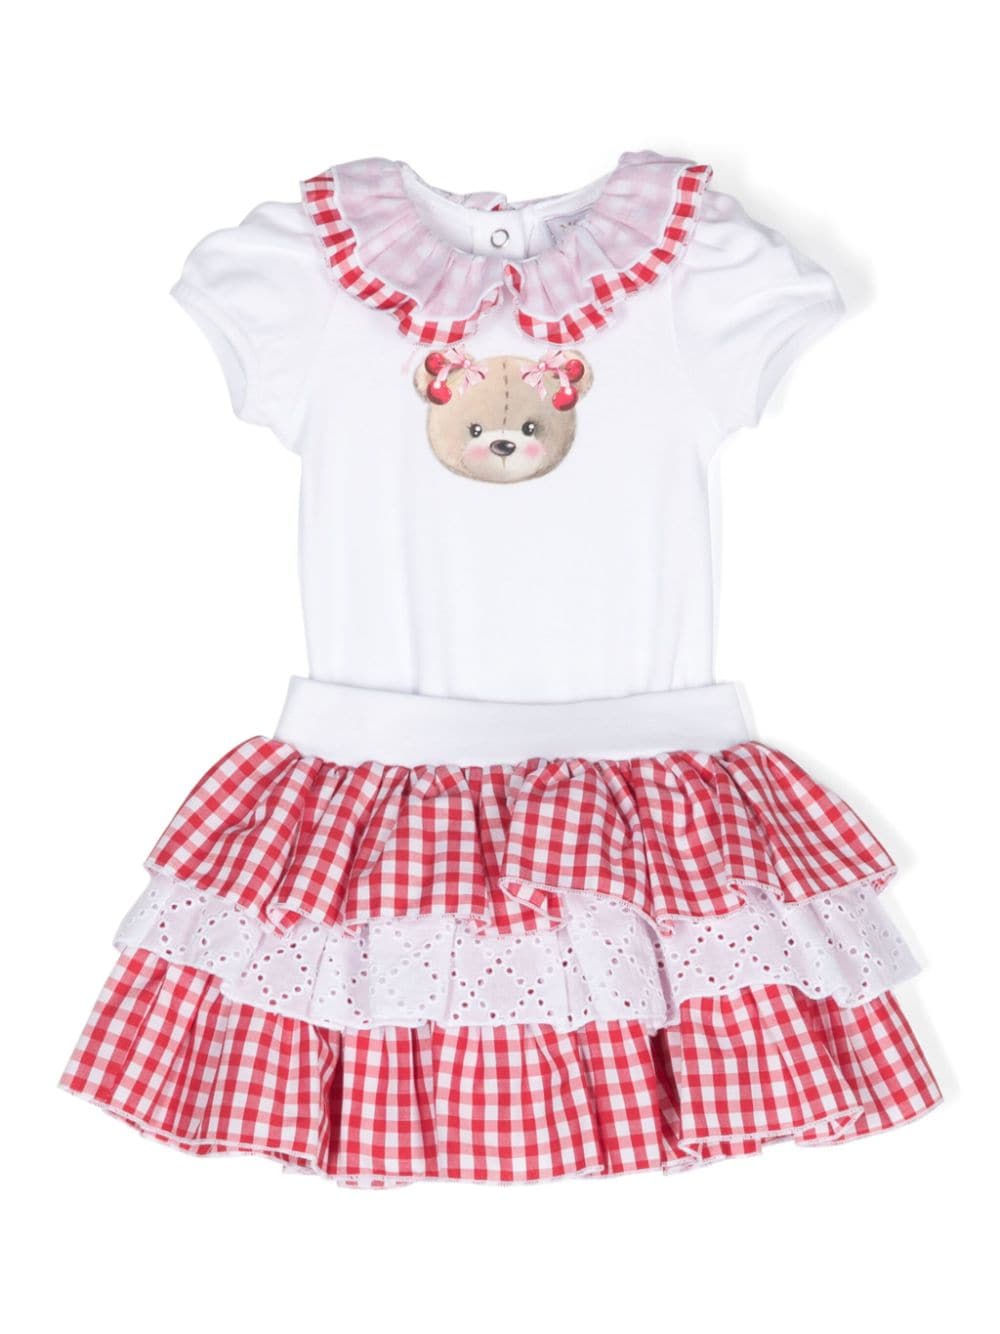 Red checked patterned baby girl outfit